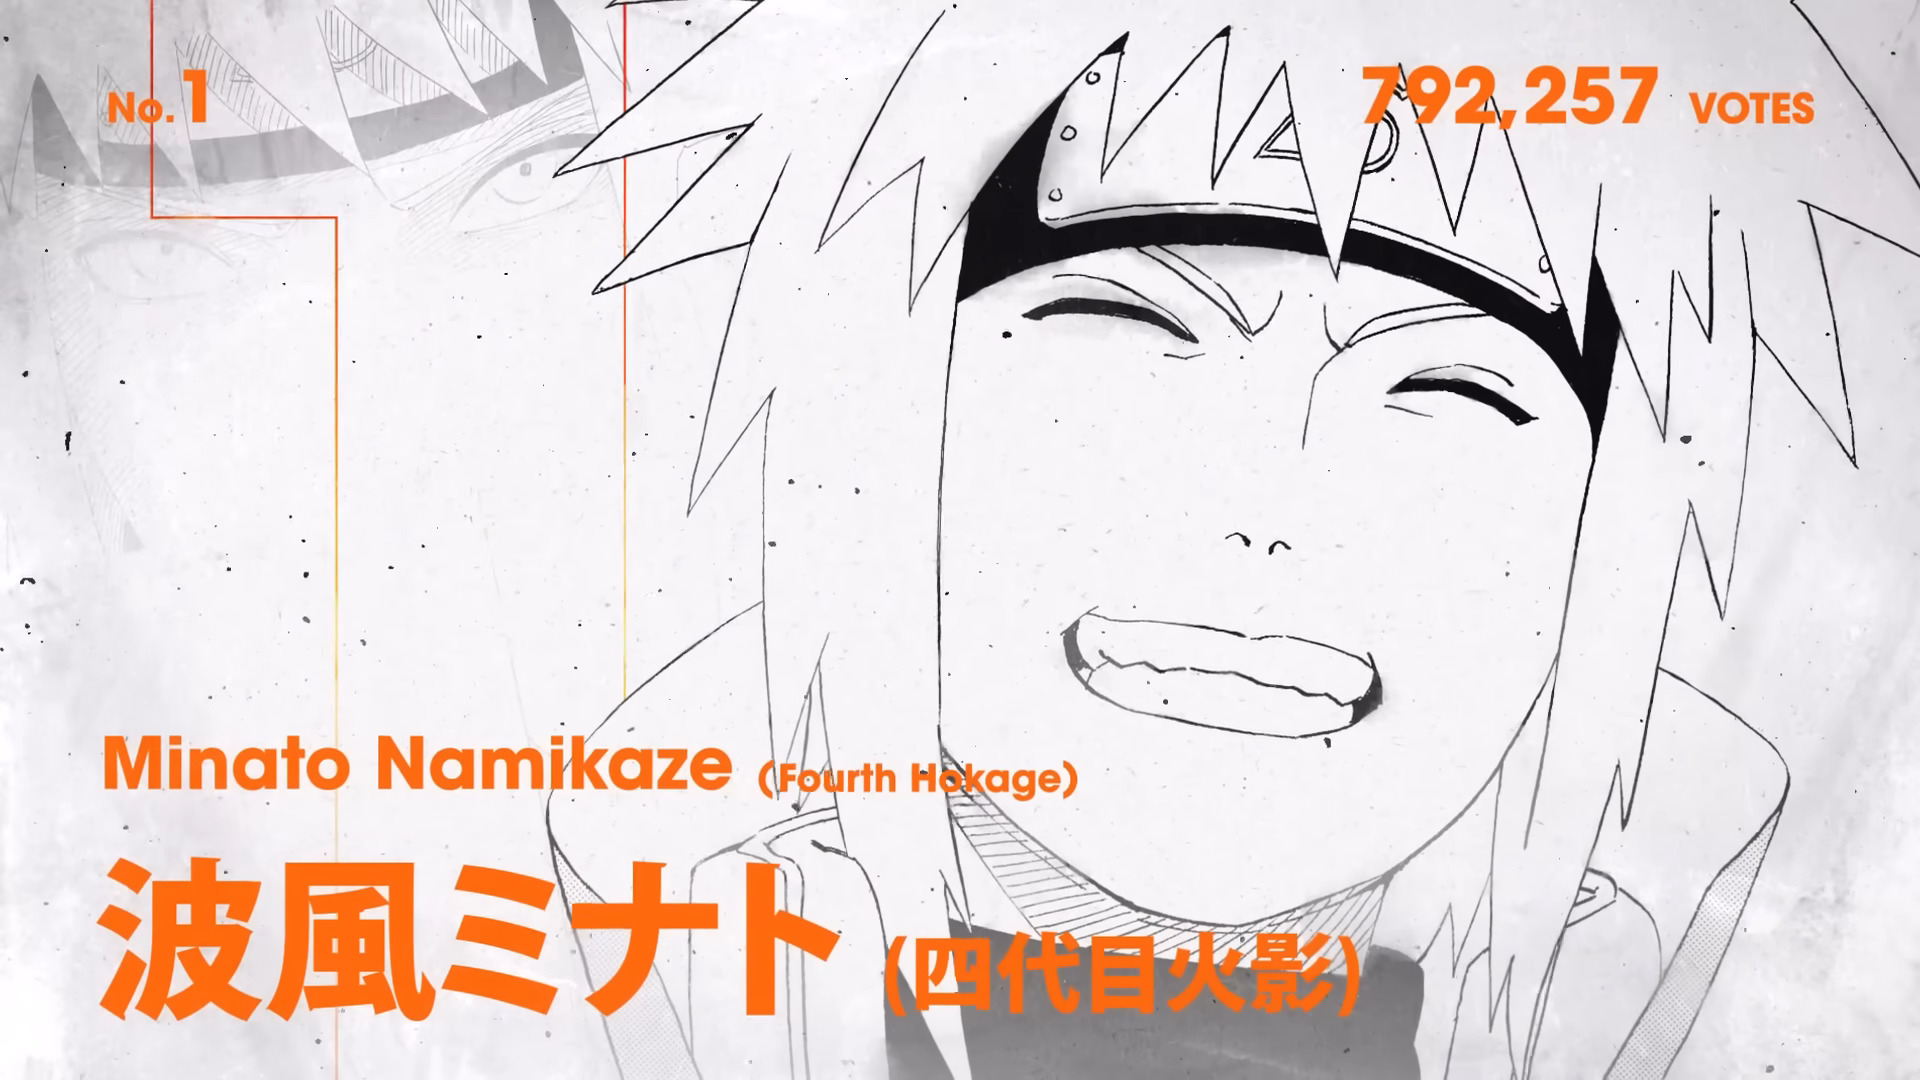 Minato Namikaze takes first place in the first ever worldwide NARUTOP99 popularity poll.